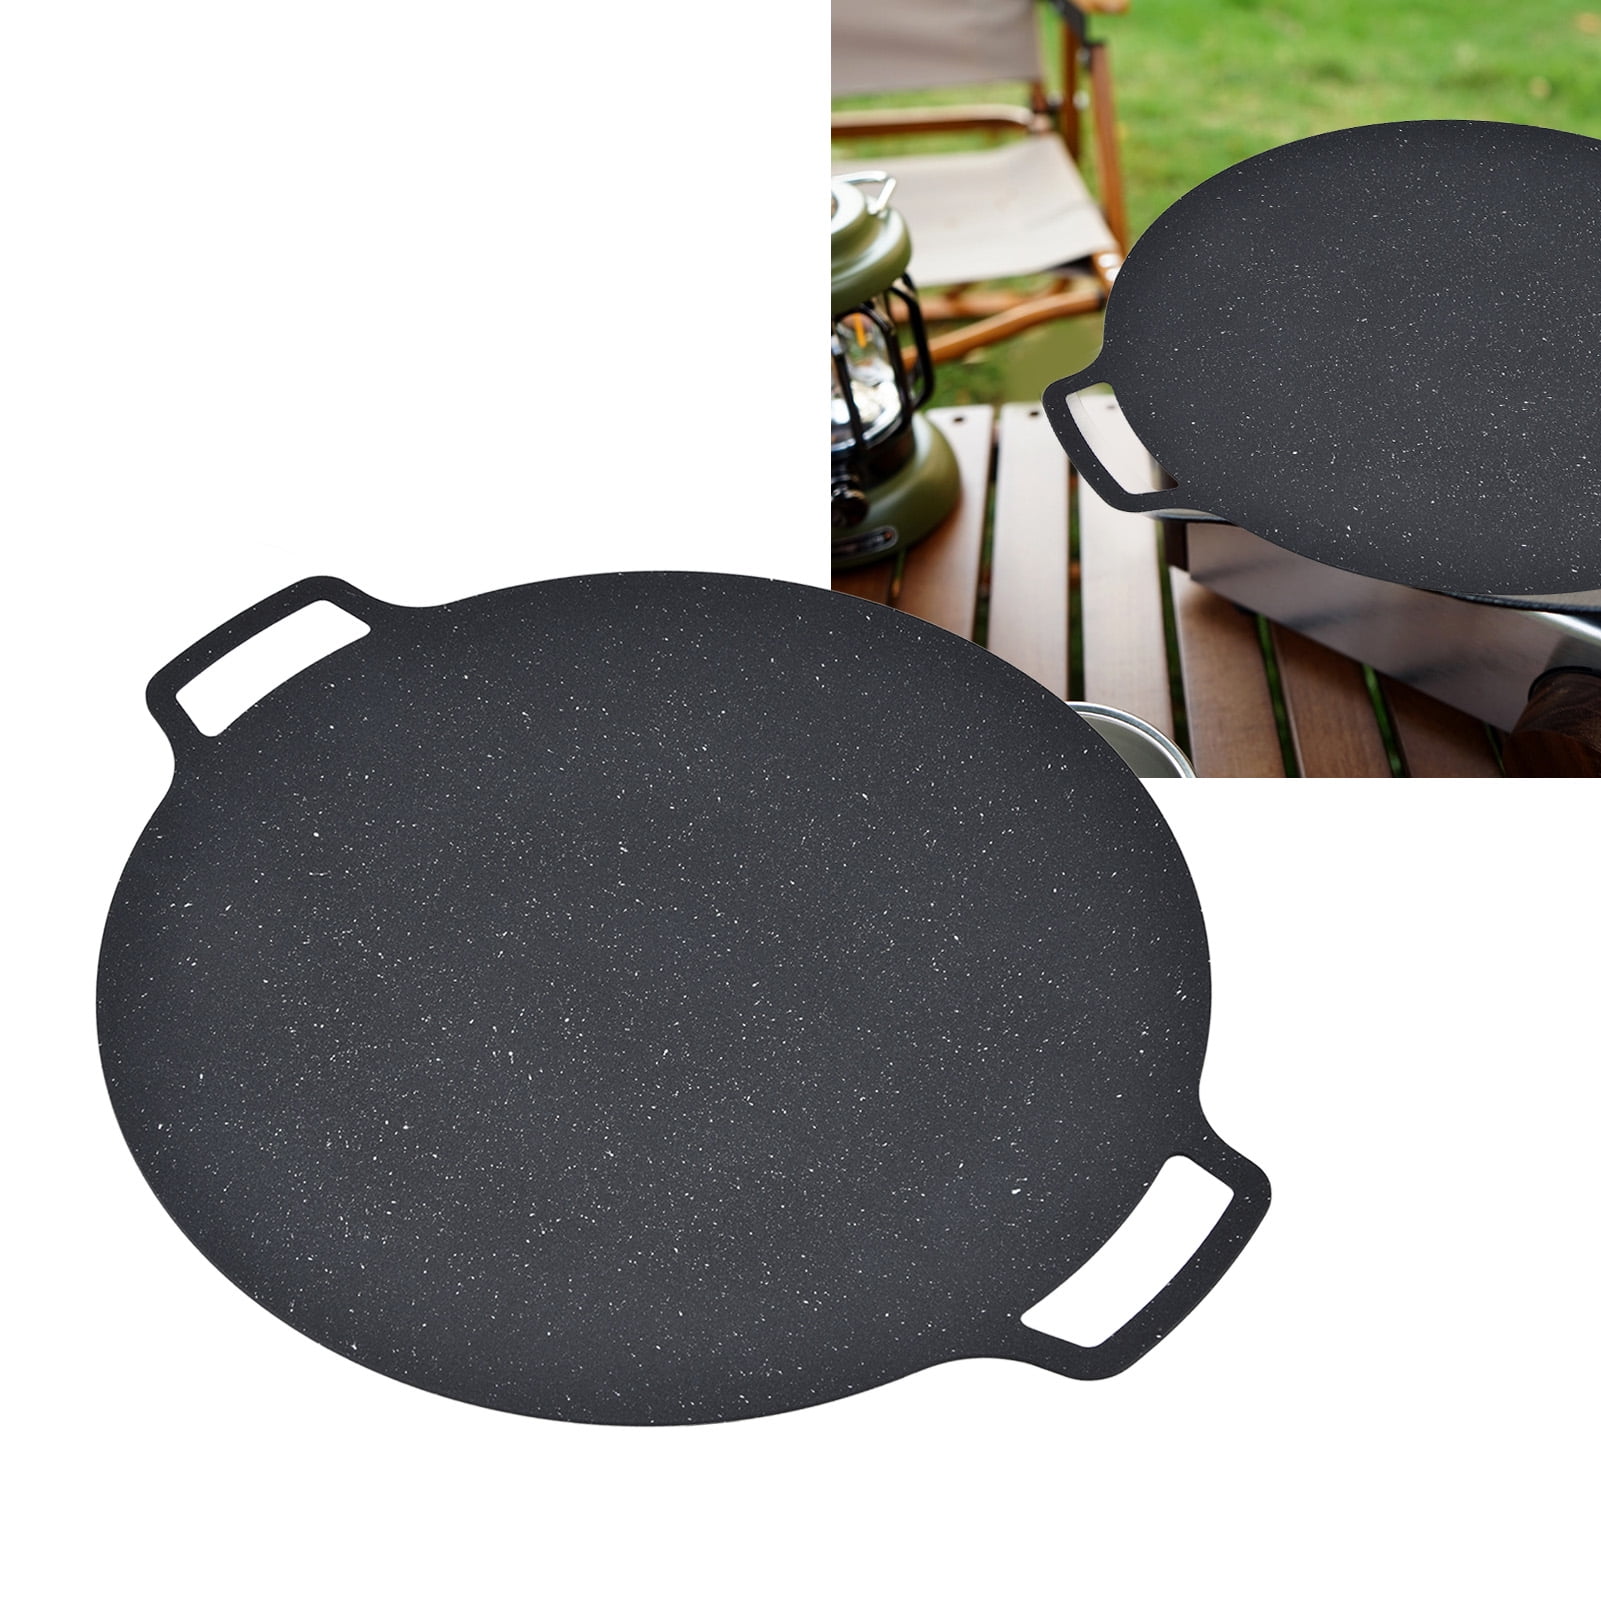 CHYIR Korean Style Non-Stick Indoor Grill Stovetop Plate Barbecue Pan 